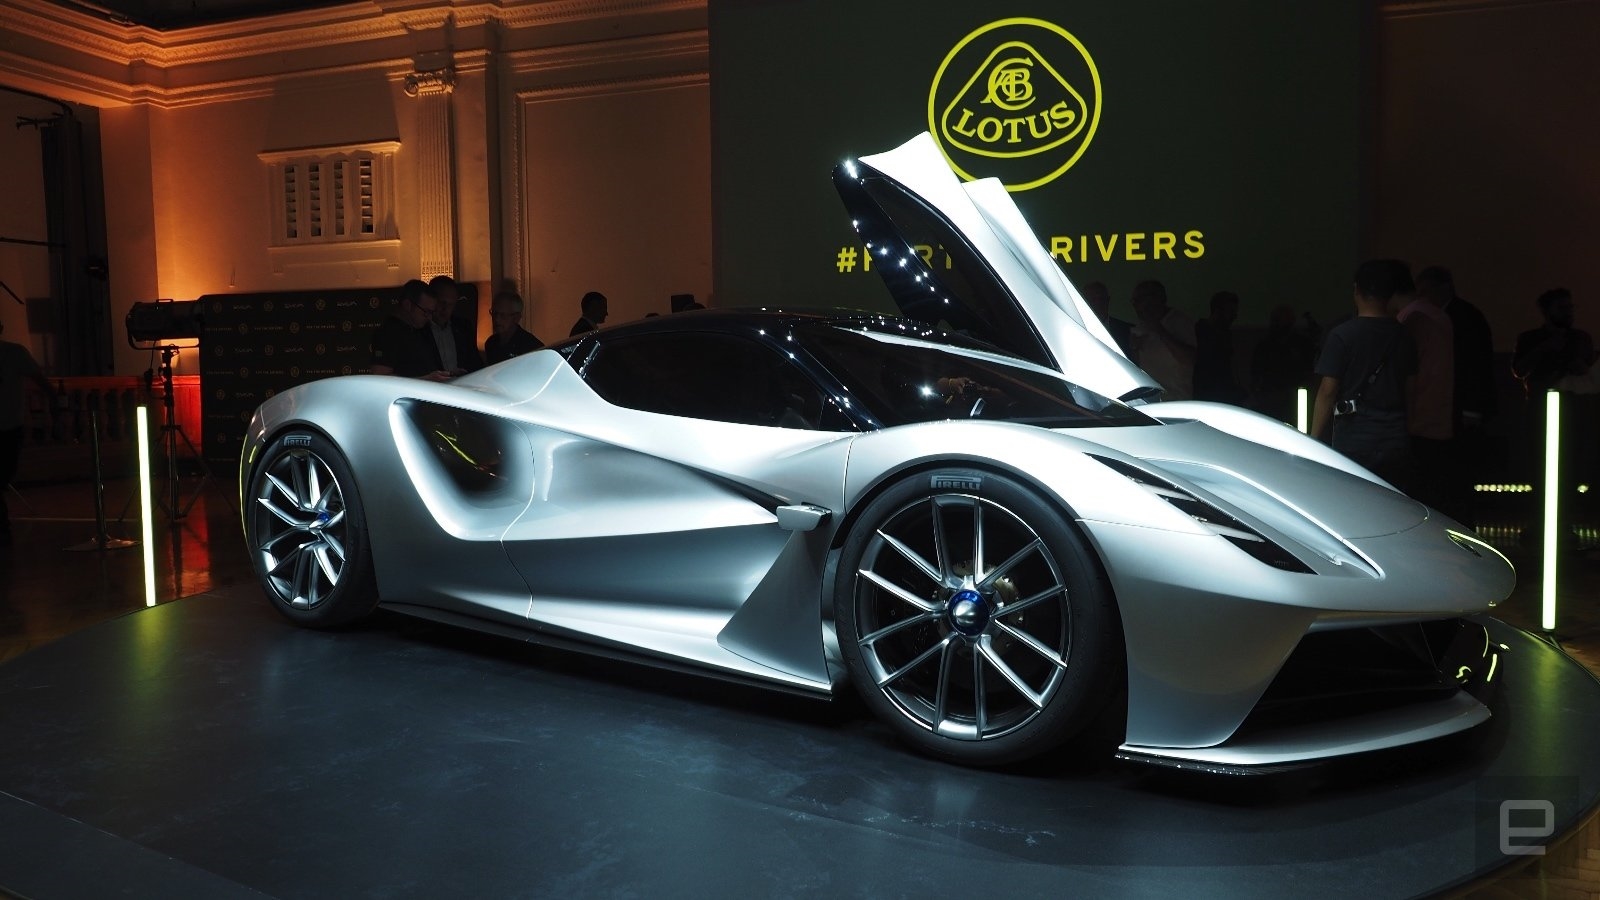 Lotus has already sold out of its electric hypercar for 2020 | DeviceDaily.com